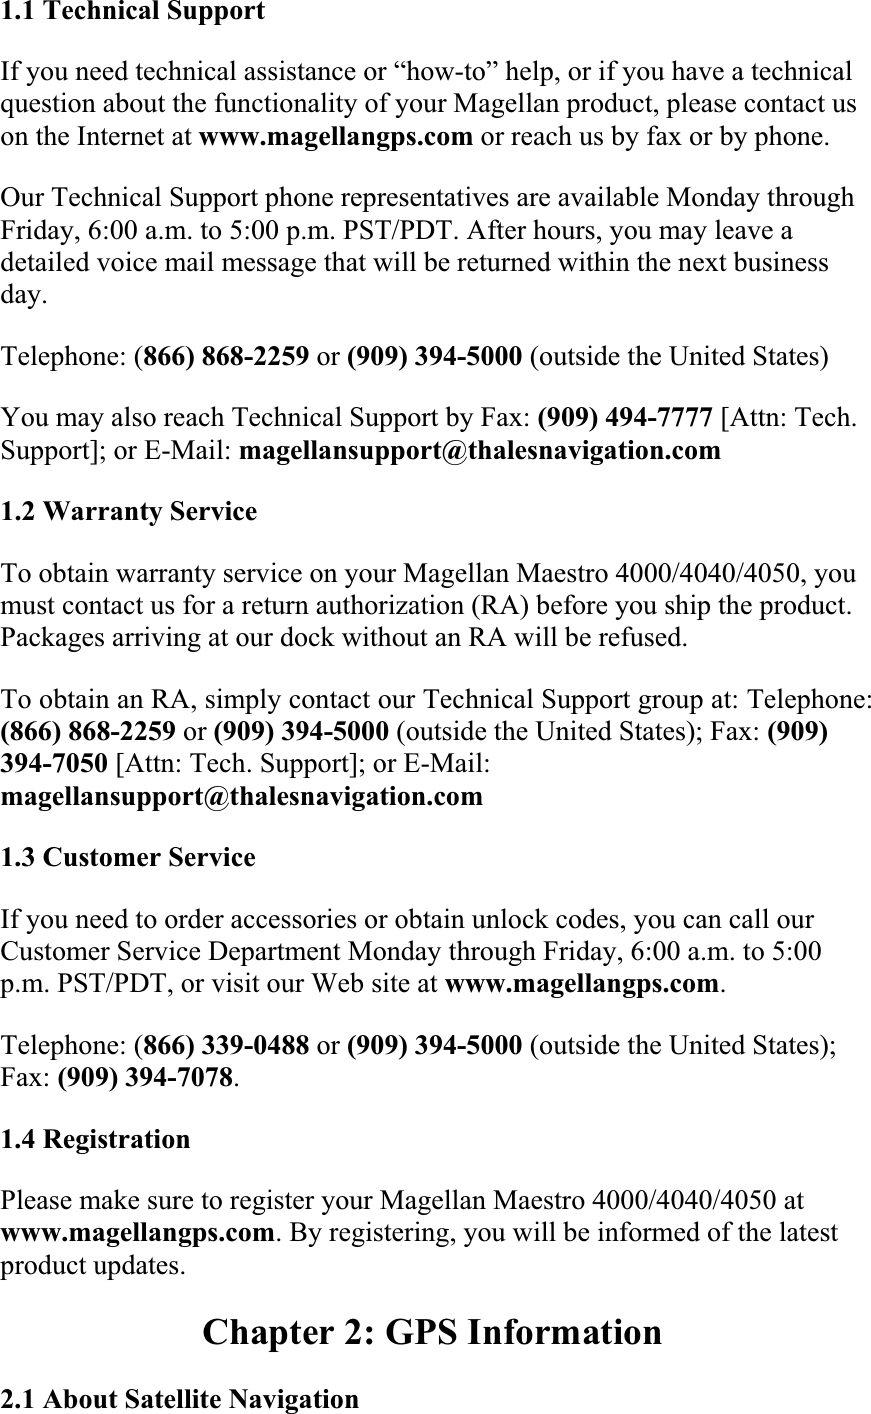 1.1 Technical SupportIf you need technical assistance or “how-to” help, or if you have a technical question about the functionality of your Magellan product, please contact us on the Internet at www.magellangps.com or reach us by fax or by phone.  Our Technical Support phone representatives are available Monday through Friday, 6:00 a.m. to 5:00 p.m. PST/PDT. After hours, you may leave a detailed voice mail message that will be returned within the next business day.Telephone: (866) 868-2259 or (909) 394-5000 (outside the United States)  You may also reach Technical Support by Fax: (909) 494-7777 [Attn: Tech. Support]; or E-Mail: magellansupport@thalesnavigation.com1.2 Warranty Service  To obtain warranty service on your Magellan Maestro 4000/4040/4050, you must contact us for a return authorization (RA) before you ship the product. Packages arriving at our dock without an RA will be refused.  To obtain an RA, simply contact our Technical Support group at: Telephone: (866) 868-2259 or (909) 394-5000 (outside the United States); Fax: (909)394-7050 [Attn: Tech. Support]; or E-Mail: magellansupport@thalesnavigation.com1.3 Customer ServiceIf you need to order accessories or obtain unlock codes, you can call our Customer Service Department Monday through Friday, 6:00 a.m. to 5:00 p.m. PST/PDT, or visit our Web site at www.magellangps.com.Telephone: (866) 339-0488 or (909) 394-5000 (outside the United States); Fax: (909) 394-7078.1.4 Registration  Please make sure to register your Magellan Maestro 4000/4040/4050 at www.magellangps.com. By registering, you will be informed of the latest product updates.  Chapter 2: GPS Information 2.1 About Satellite Navigation  